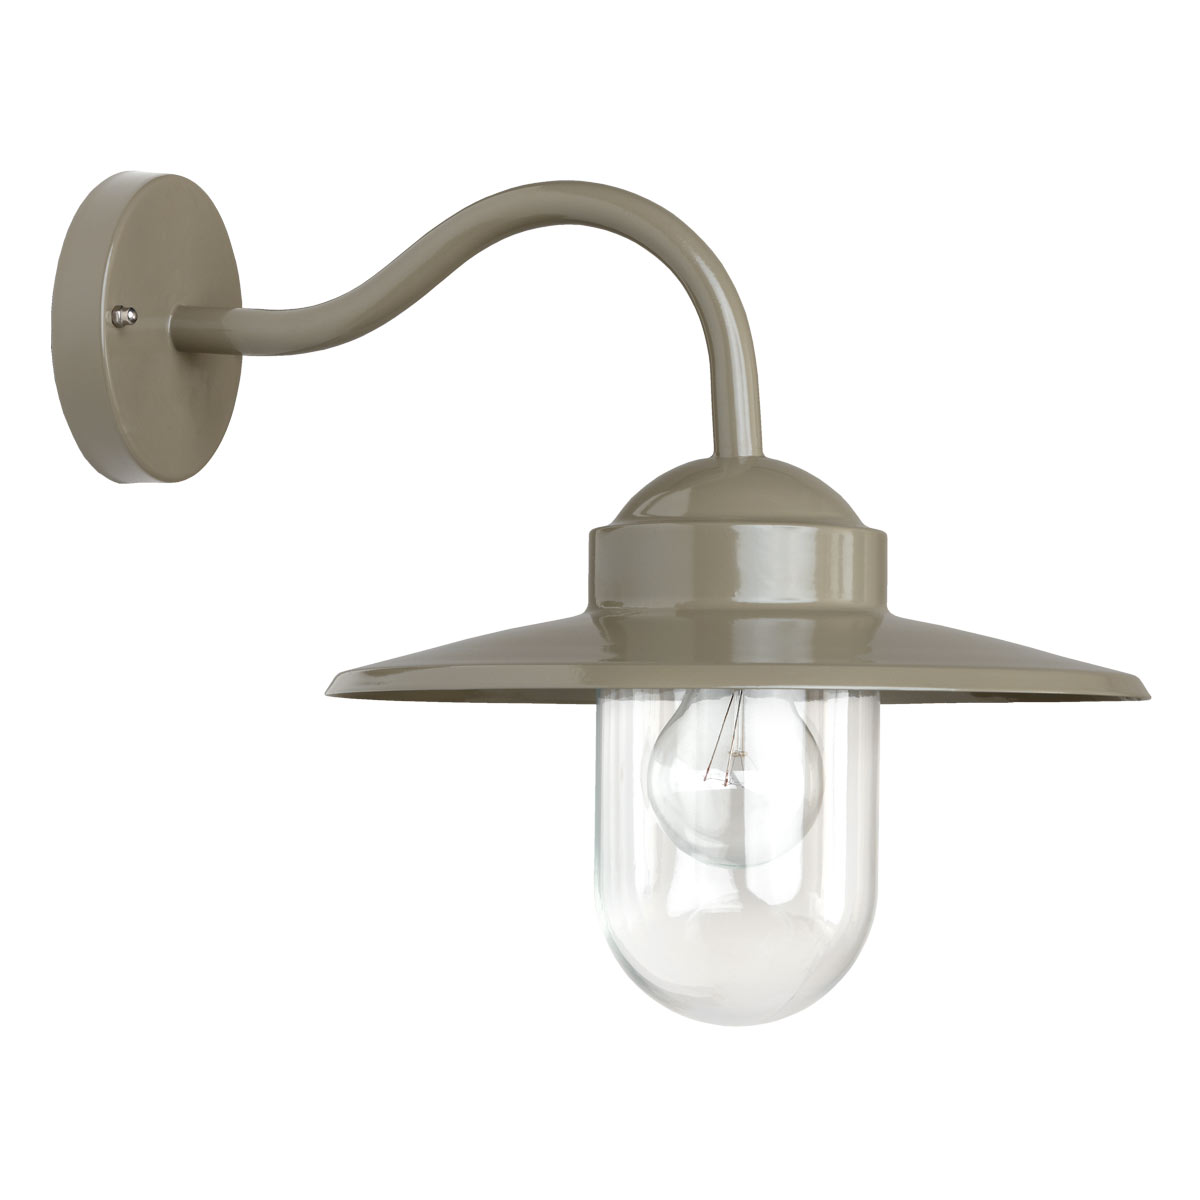 Foto: Buitenlamp Dolce Taupe